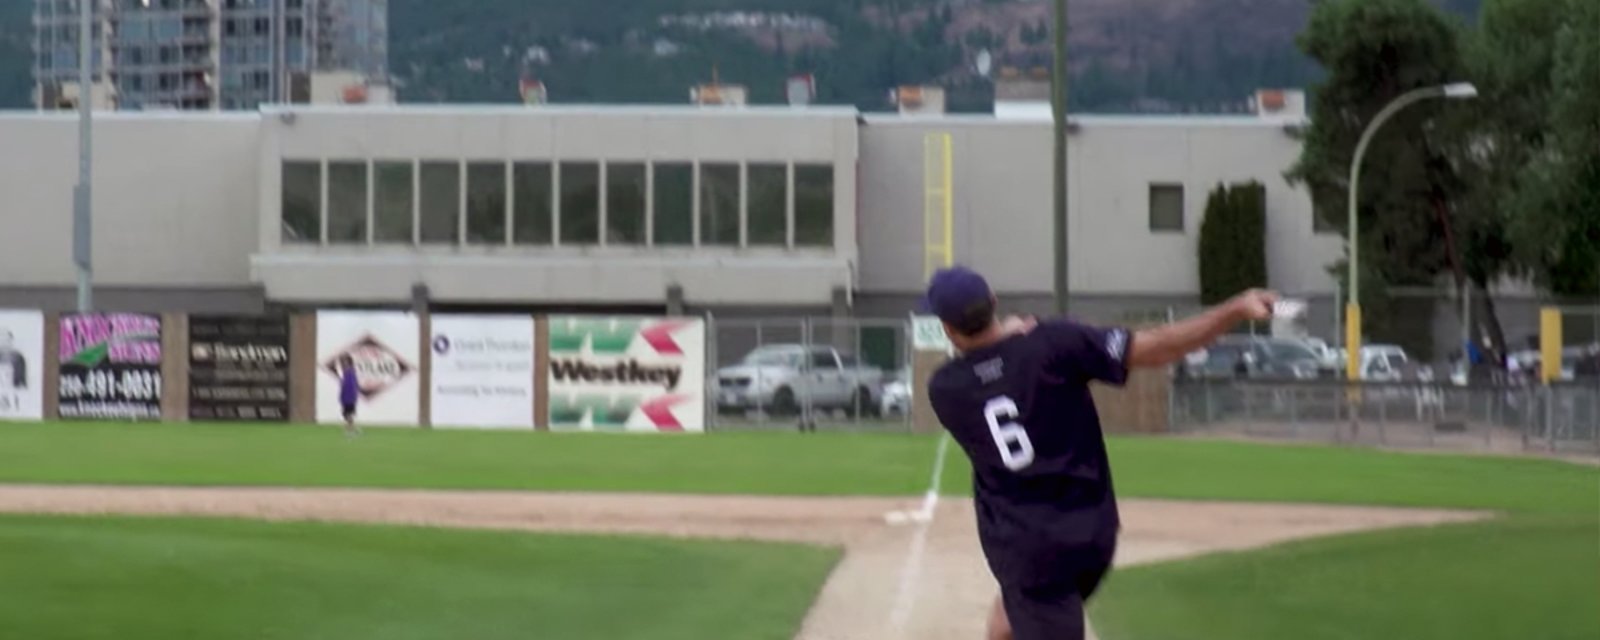 Price, Weber and Gallagher go mic’d up at charity slo-pitch game